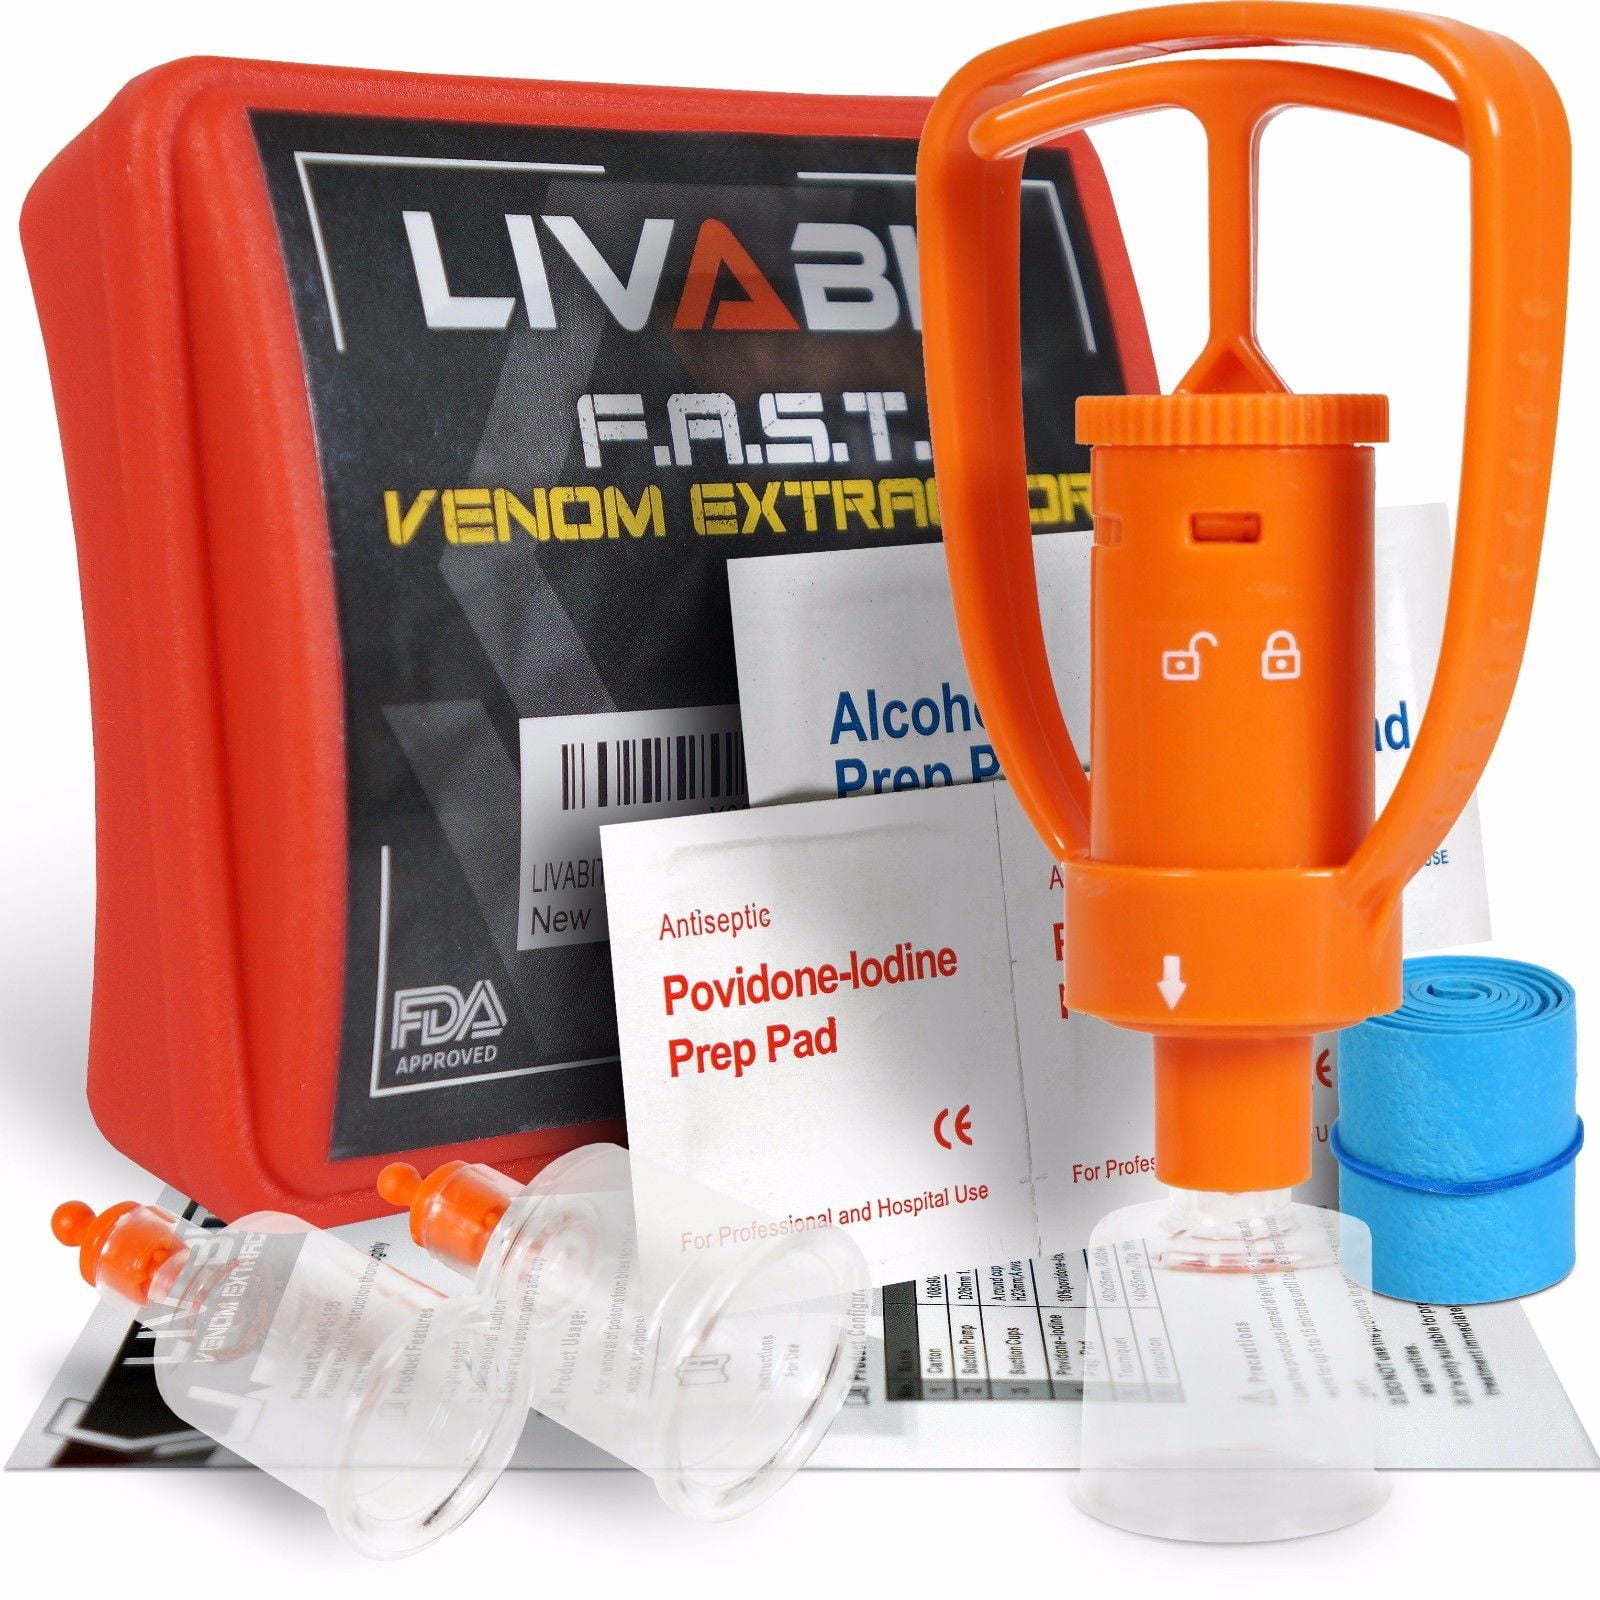 LIVABIT First Aid Safety Tool F.A.S.T. Kit Emergency Venom Extractor Snake Bite and Sting Suction Pump